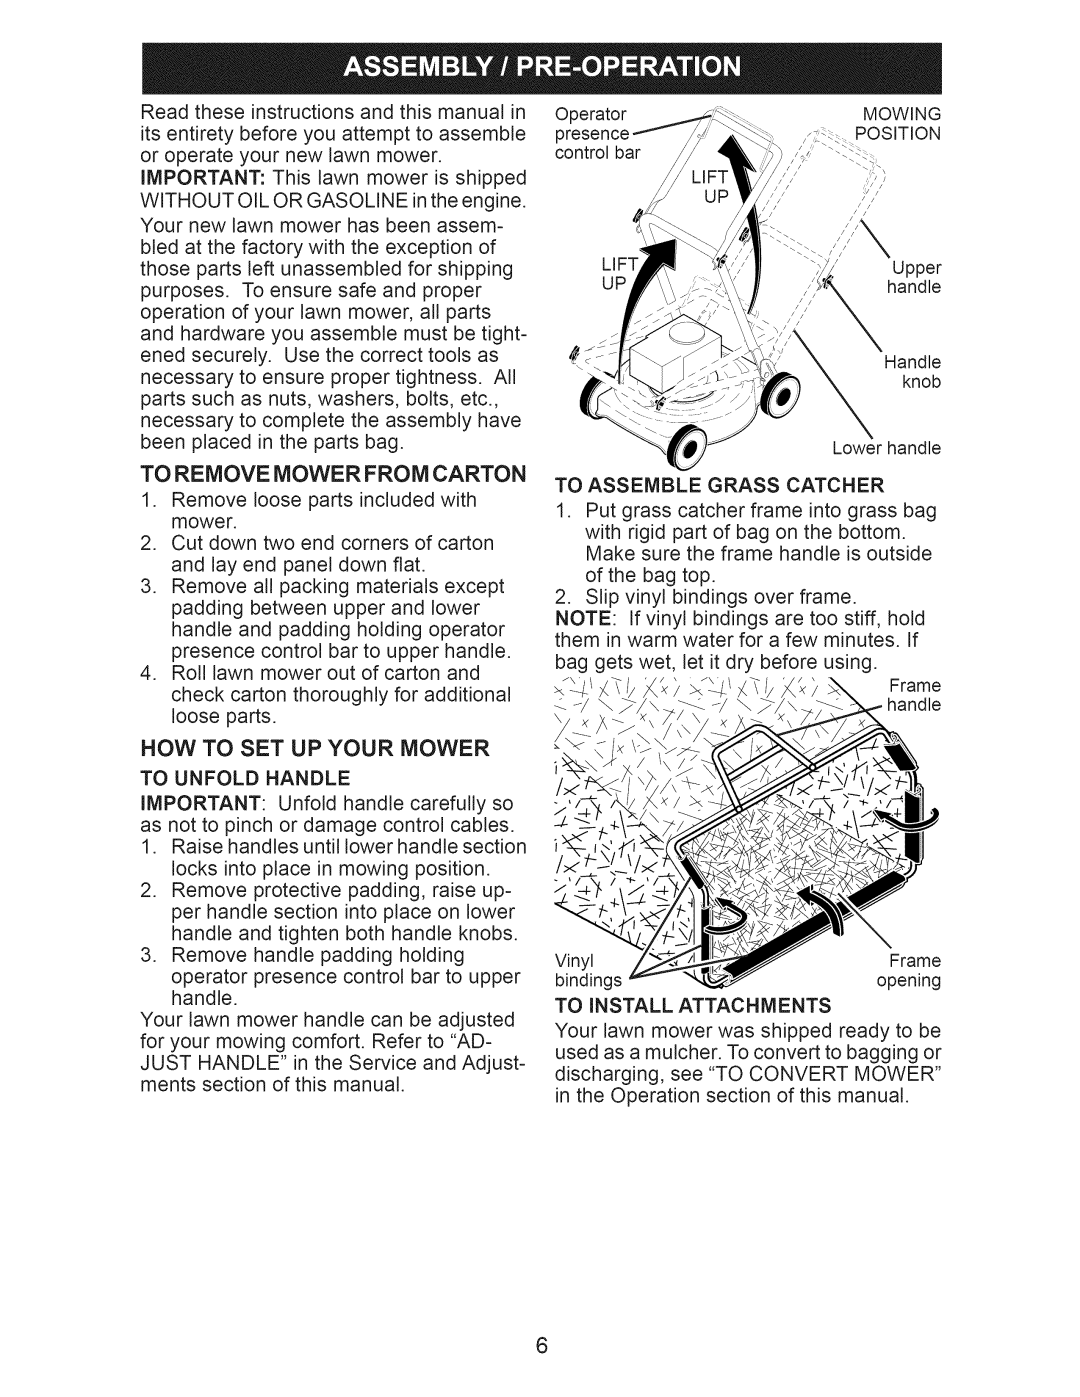 Craftsman 917.389051 manual Now To Set Up Your Mower, To Remove Mower From Carton 